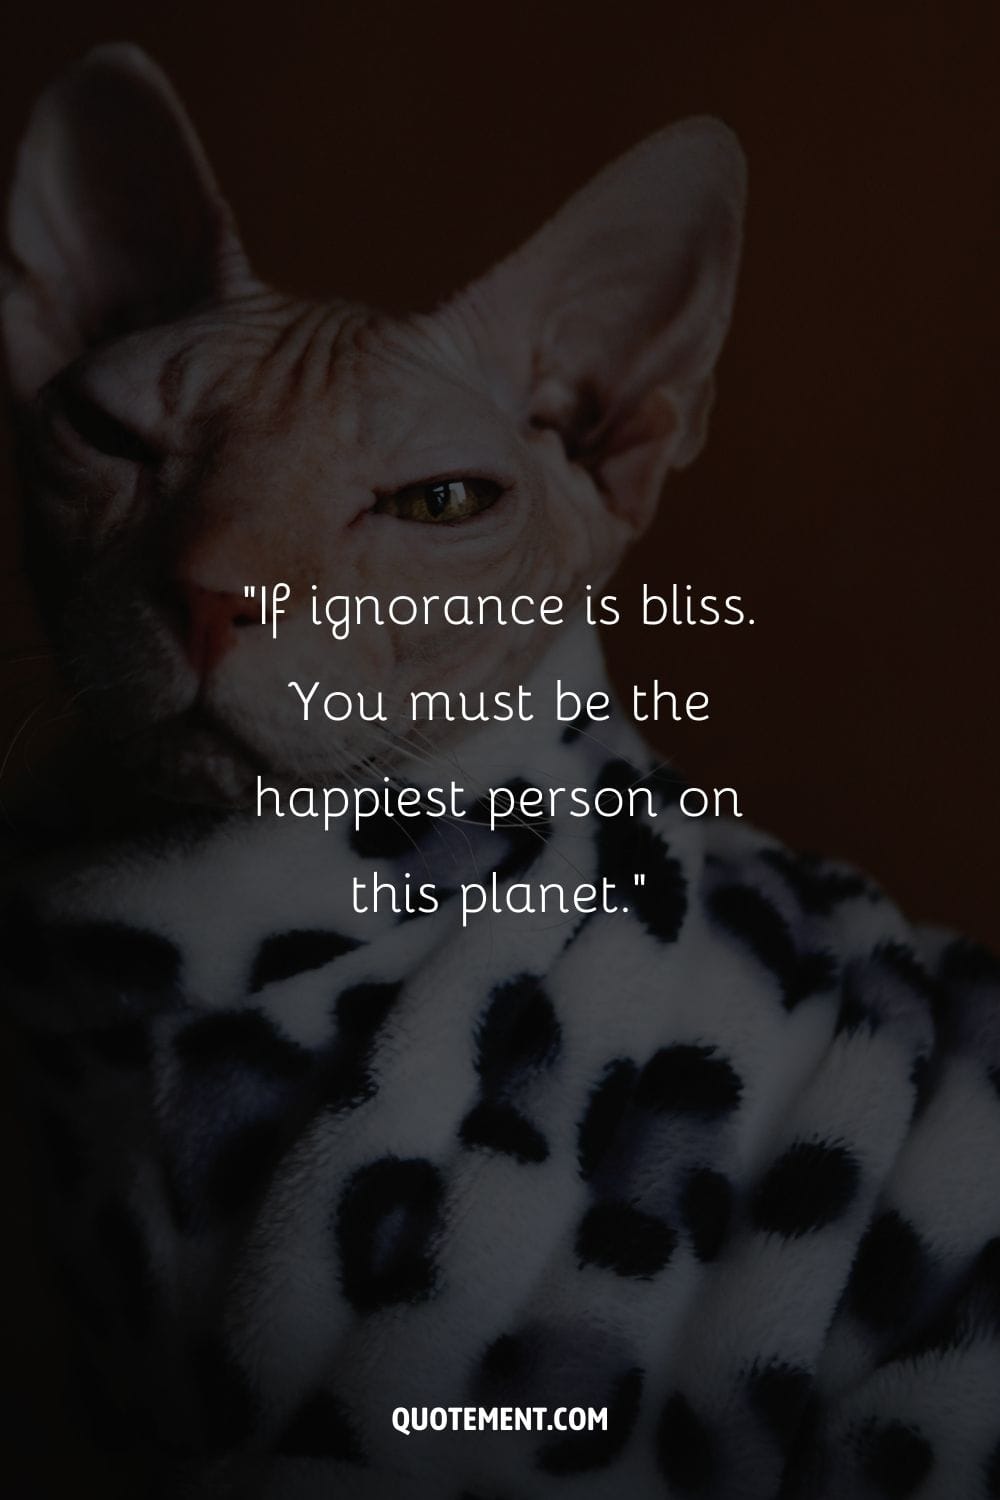 “If ignorance is bliss. You must be the happiest person on this planet.” ― Unknown